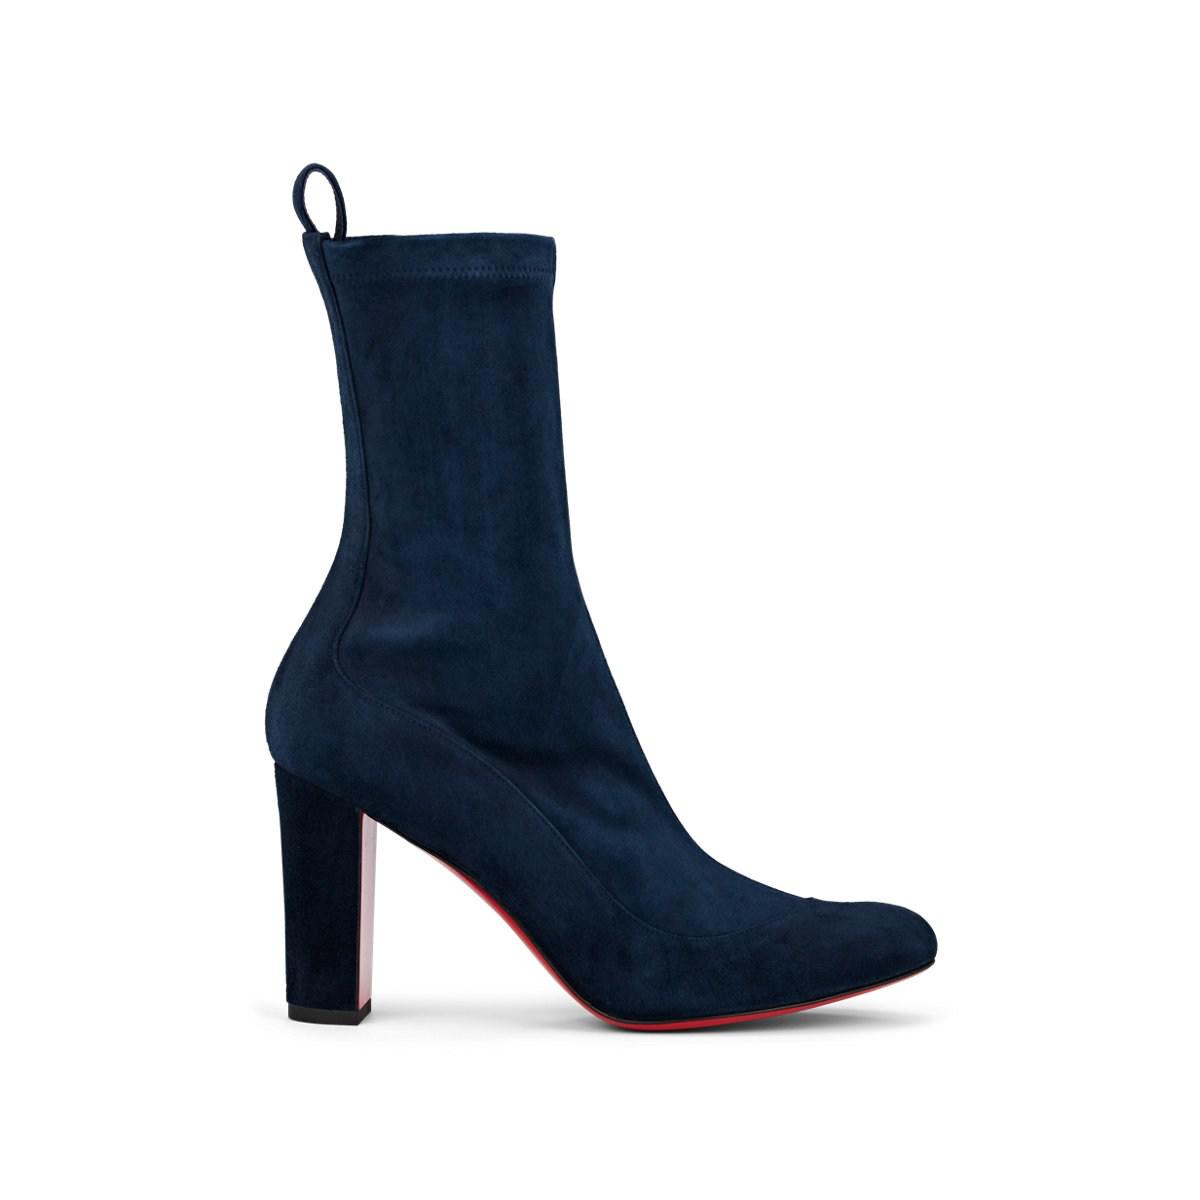 Christian Louboutin Gena Stretch-suede Ankle Boots in Marine (Blue) - Lyst